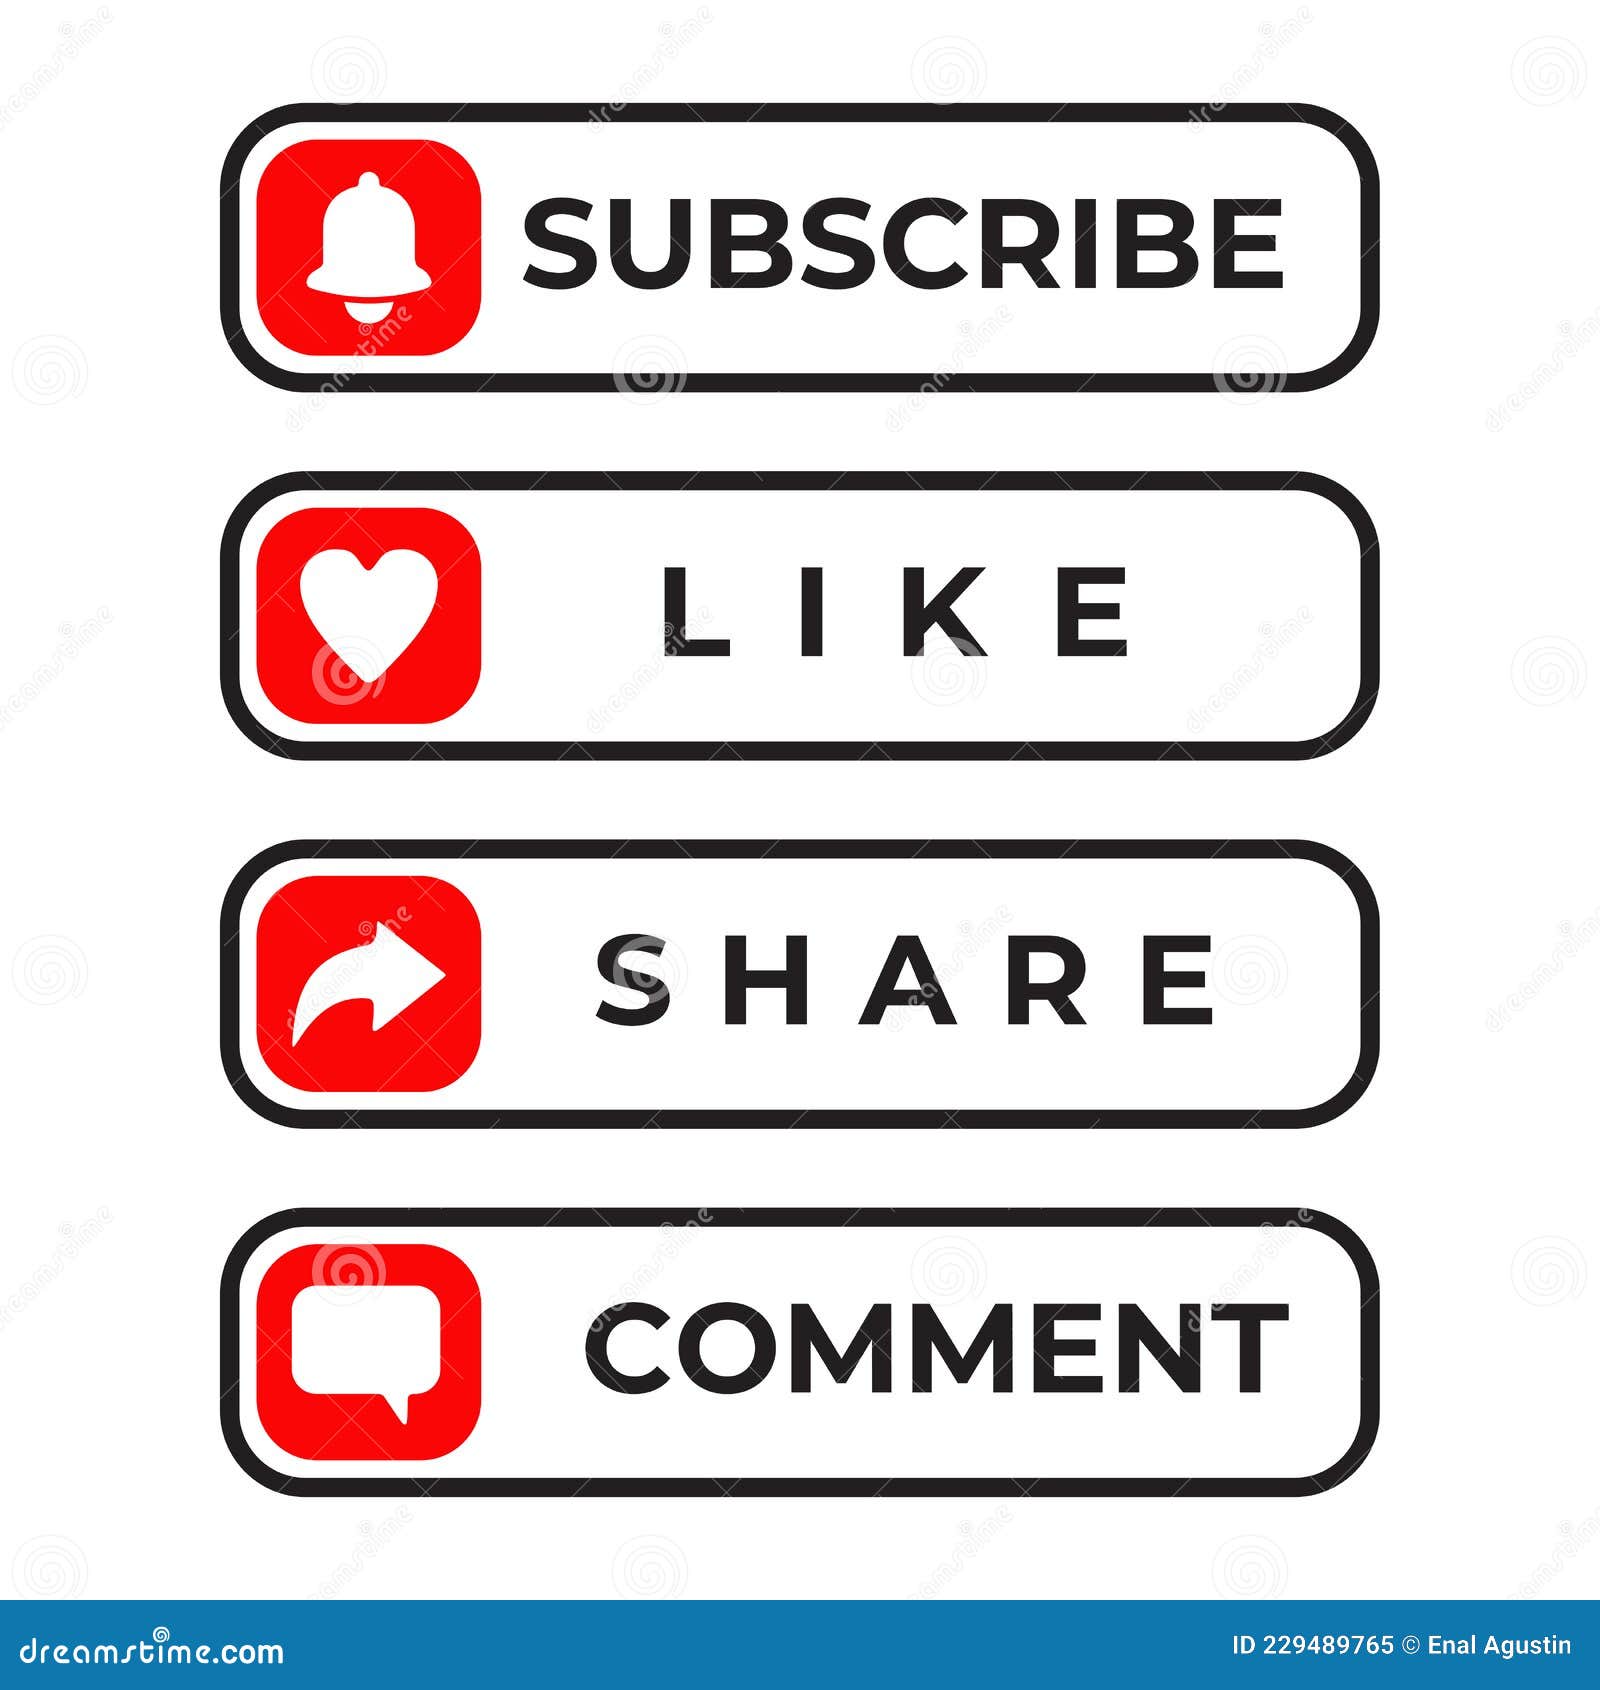 subscribe, like, share and comment button logo  for social media